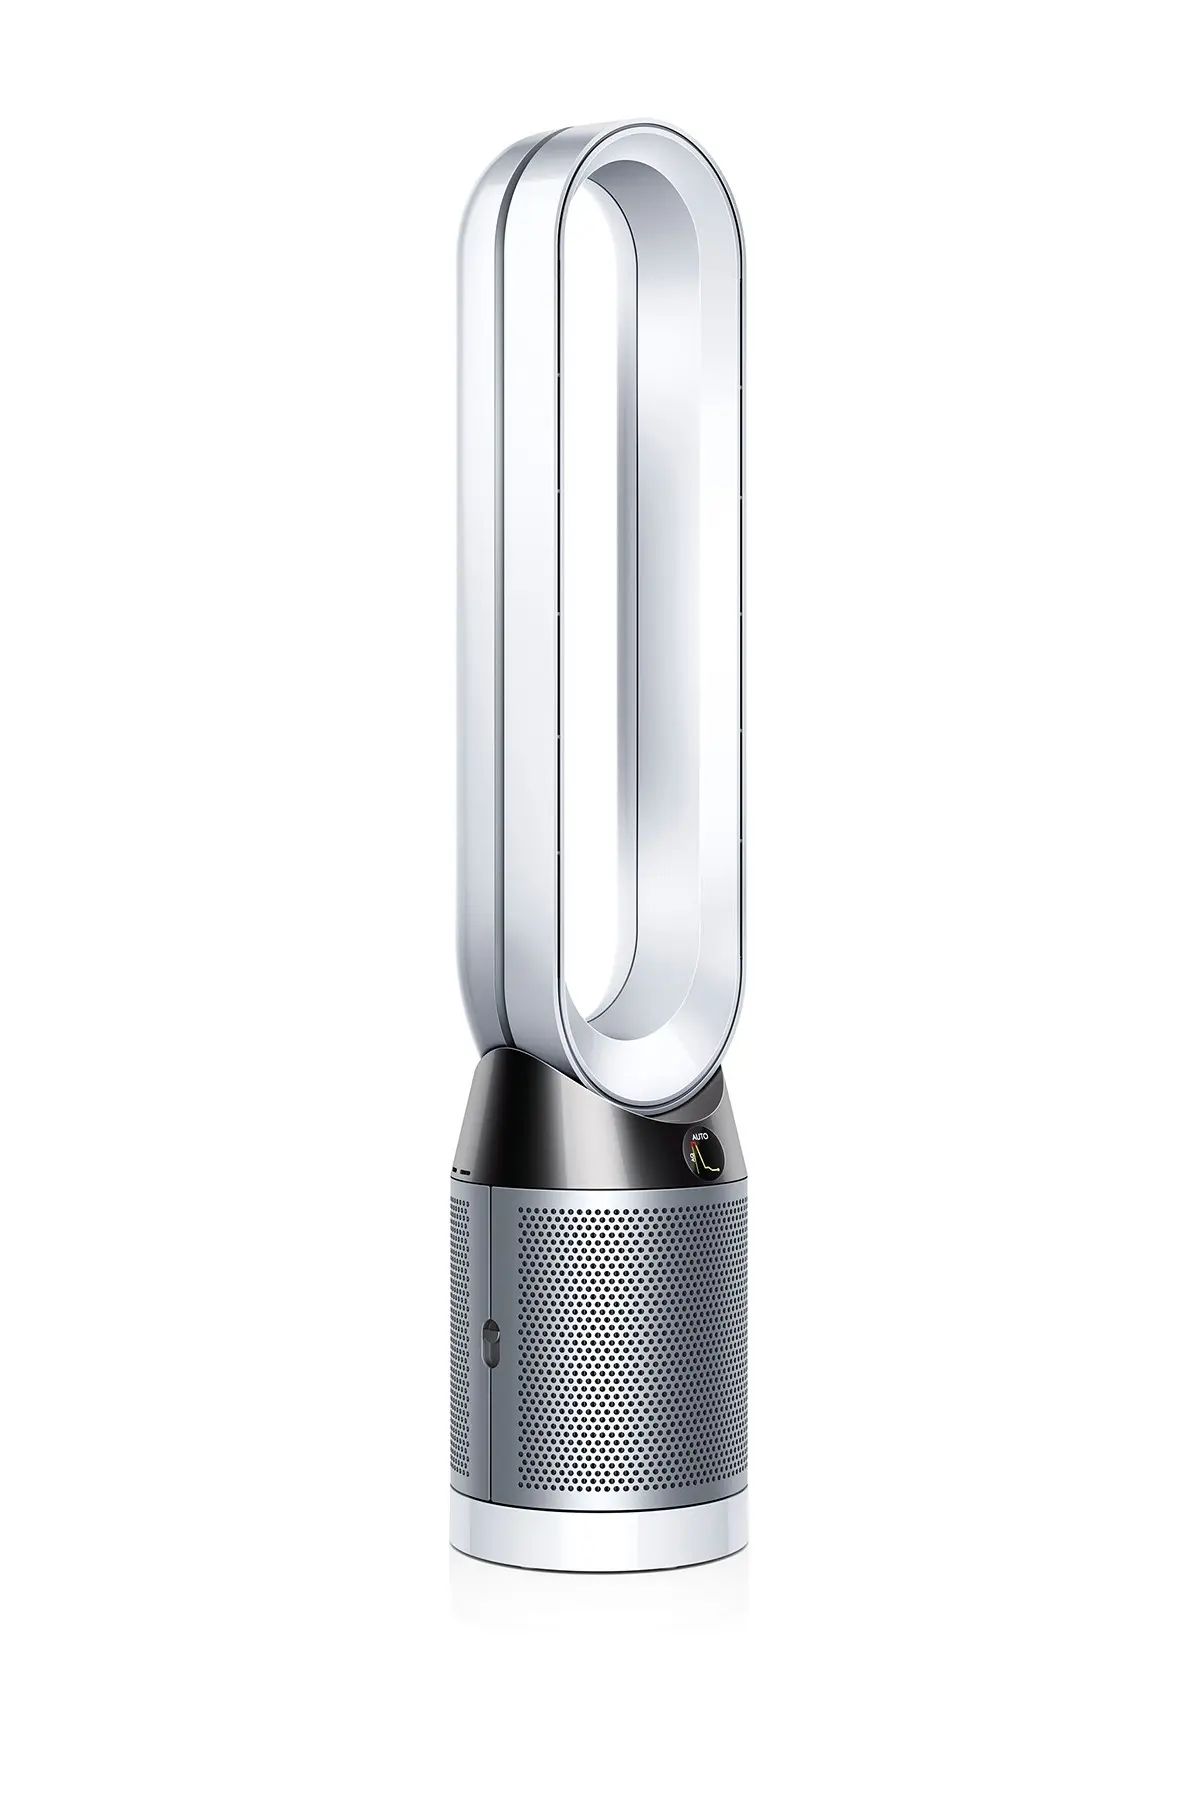 Dyson | TP04 Pure Cool Air Purifier & Fan - Refurbished | Nordstrom Rack | Nordstrom Rack